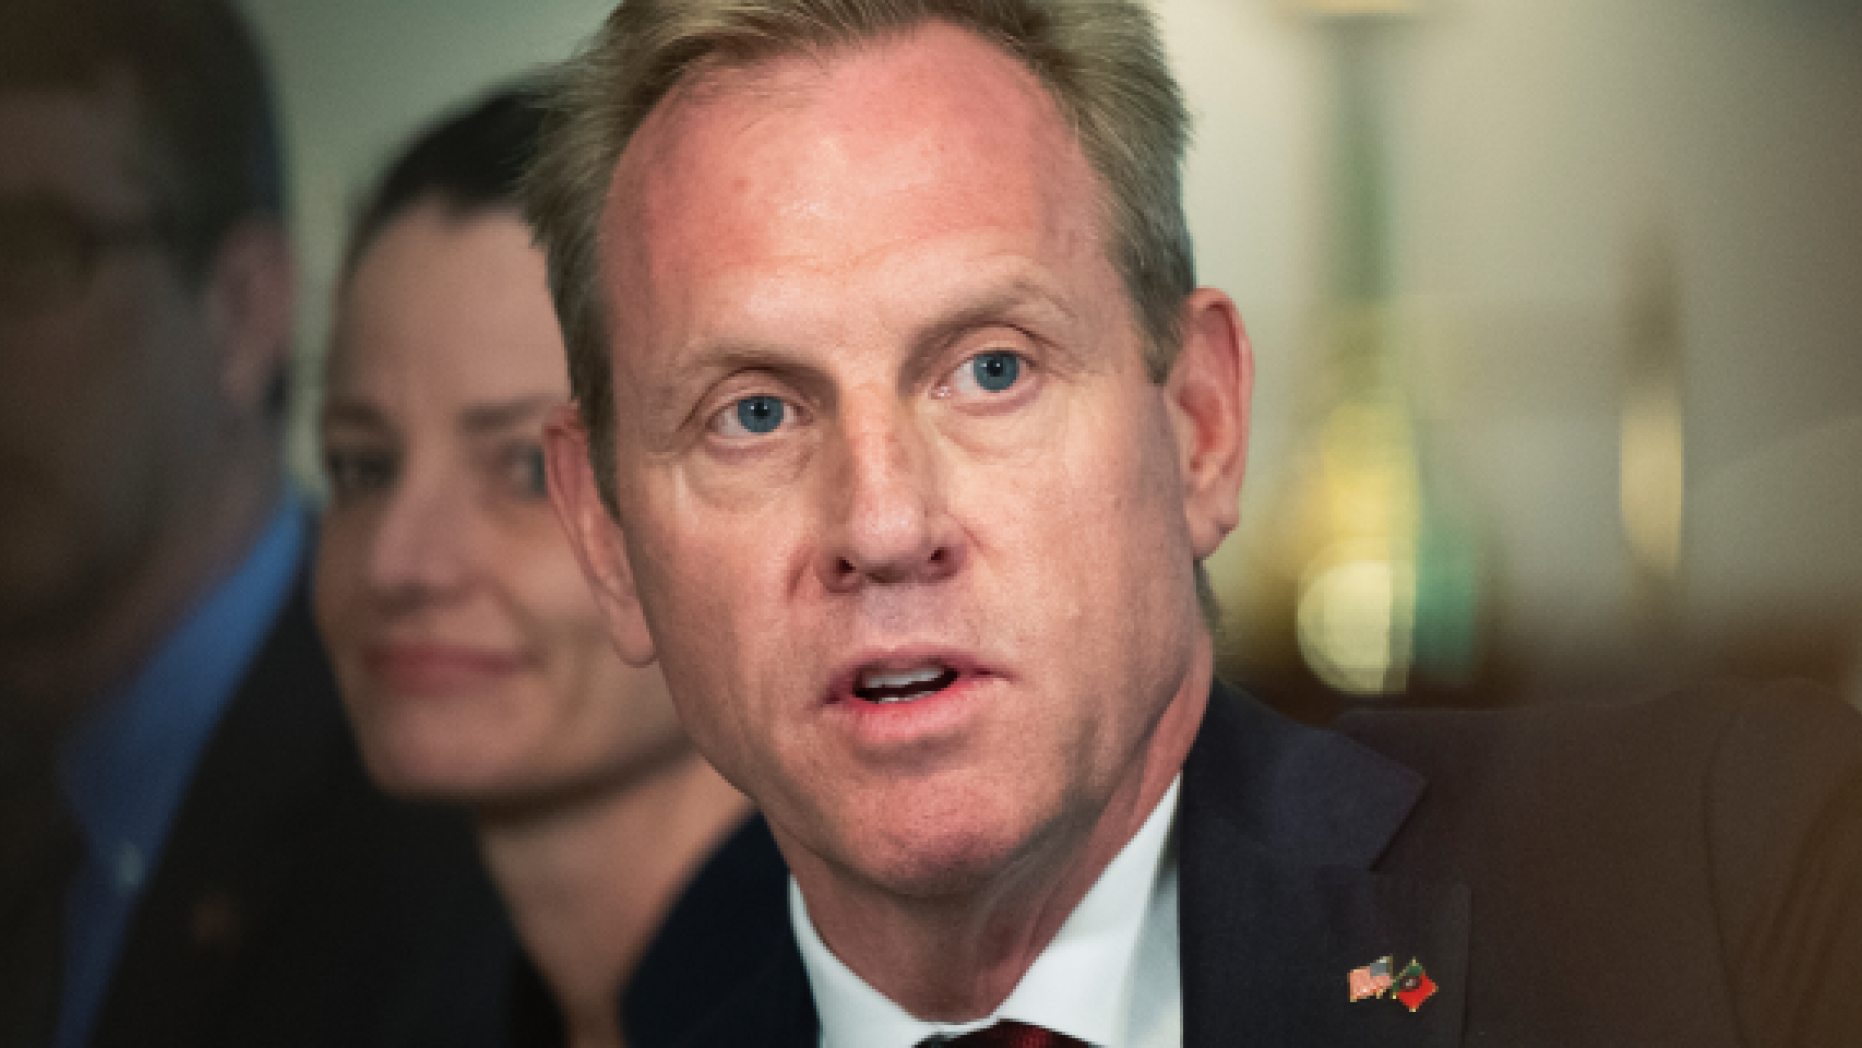 FILE - In this Feb. 14, 2019 file photo, acting Secretary of Defense Patrick Shanahan speaks about the situation in the Persian Gulf region during a meeting with Portuguese Minister of National Defense Joao Cravinho, at the Pentagon. President Donald Trump announced on June 18 that Shanahan will not move forward with the confirmation process to be Defense Secretary. (AP Photo/Manuel Balce Ceneta, File)